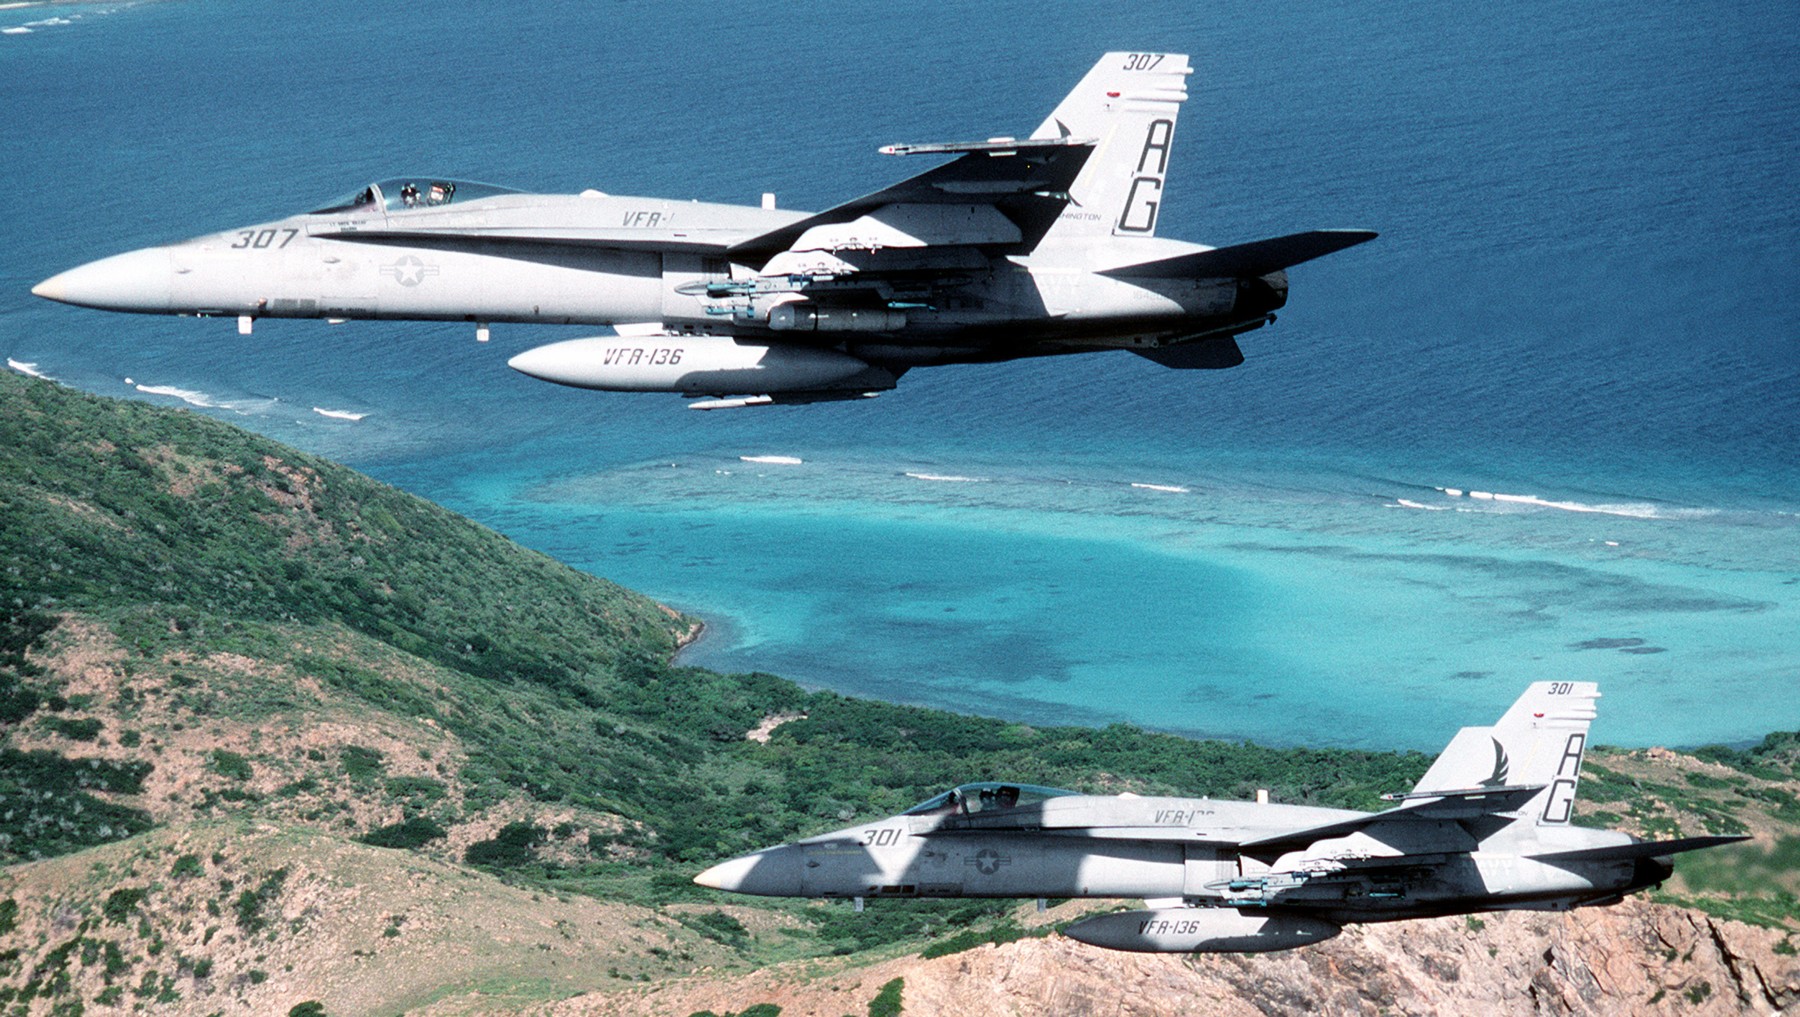 vfa-136 knighthawks strike fighter squadron f/a-18c hornet 1992 78 cvw-7 naval station roosevelt roads puerto rico